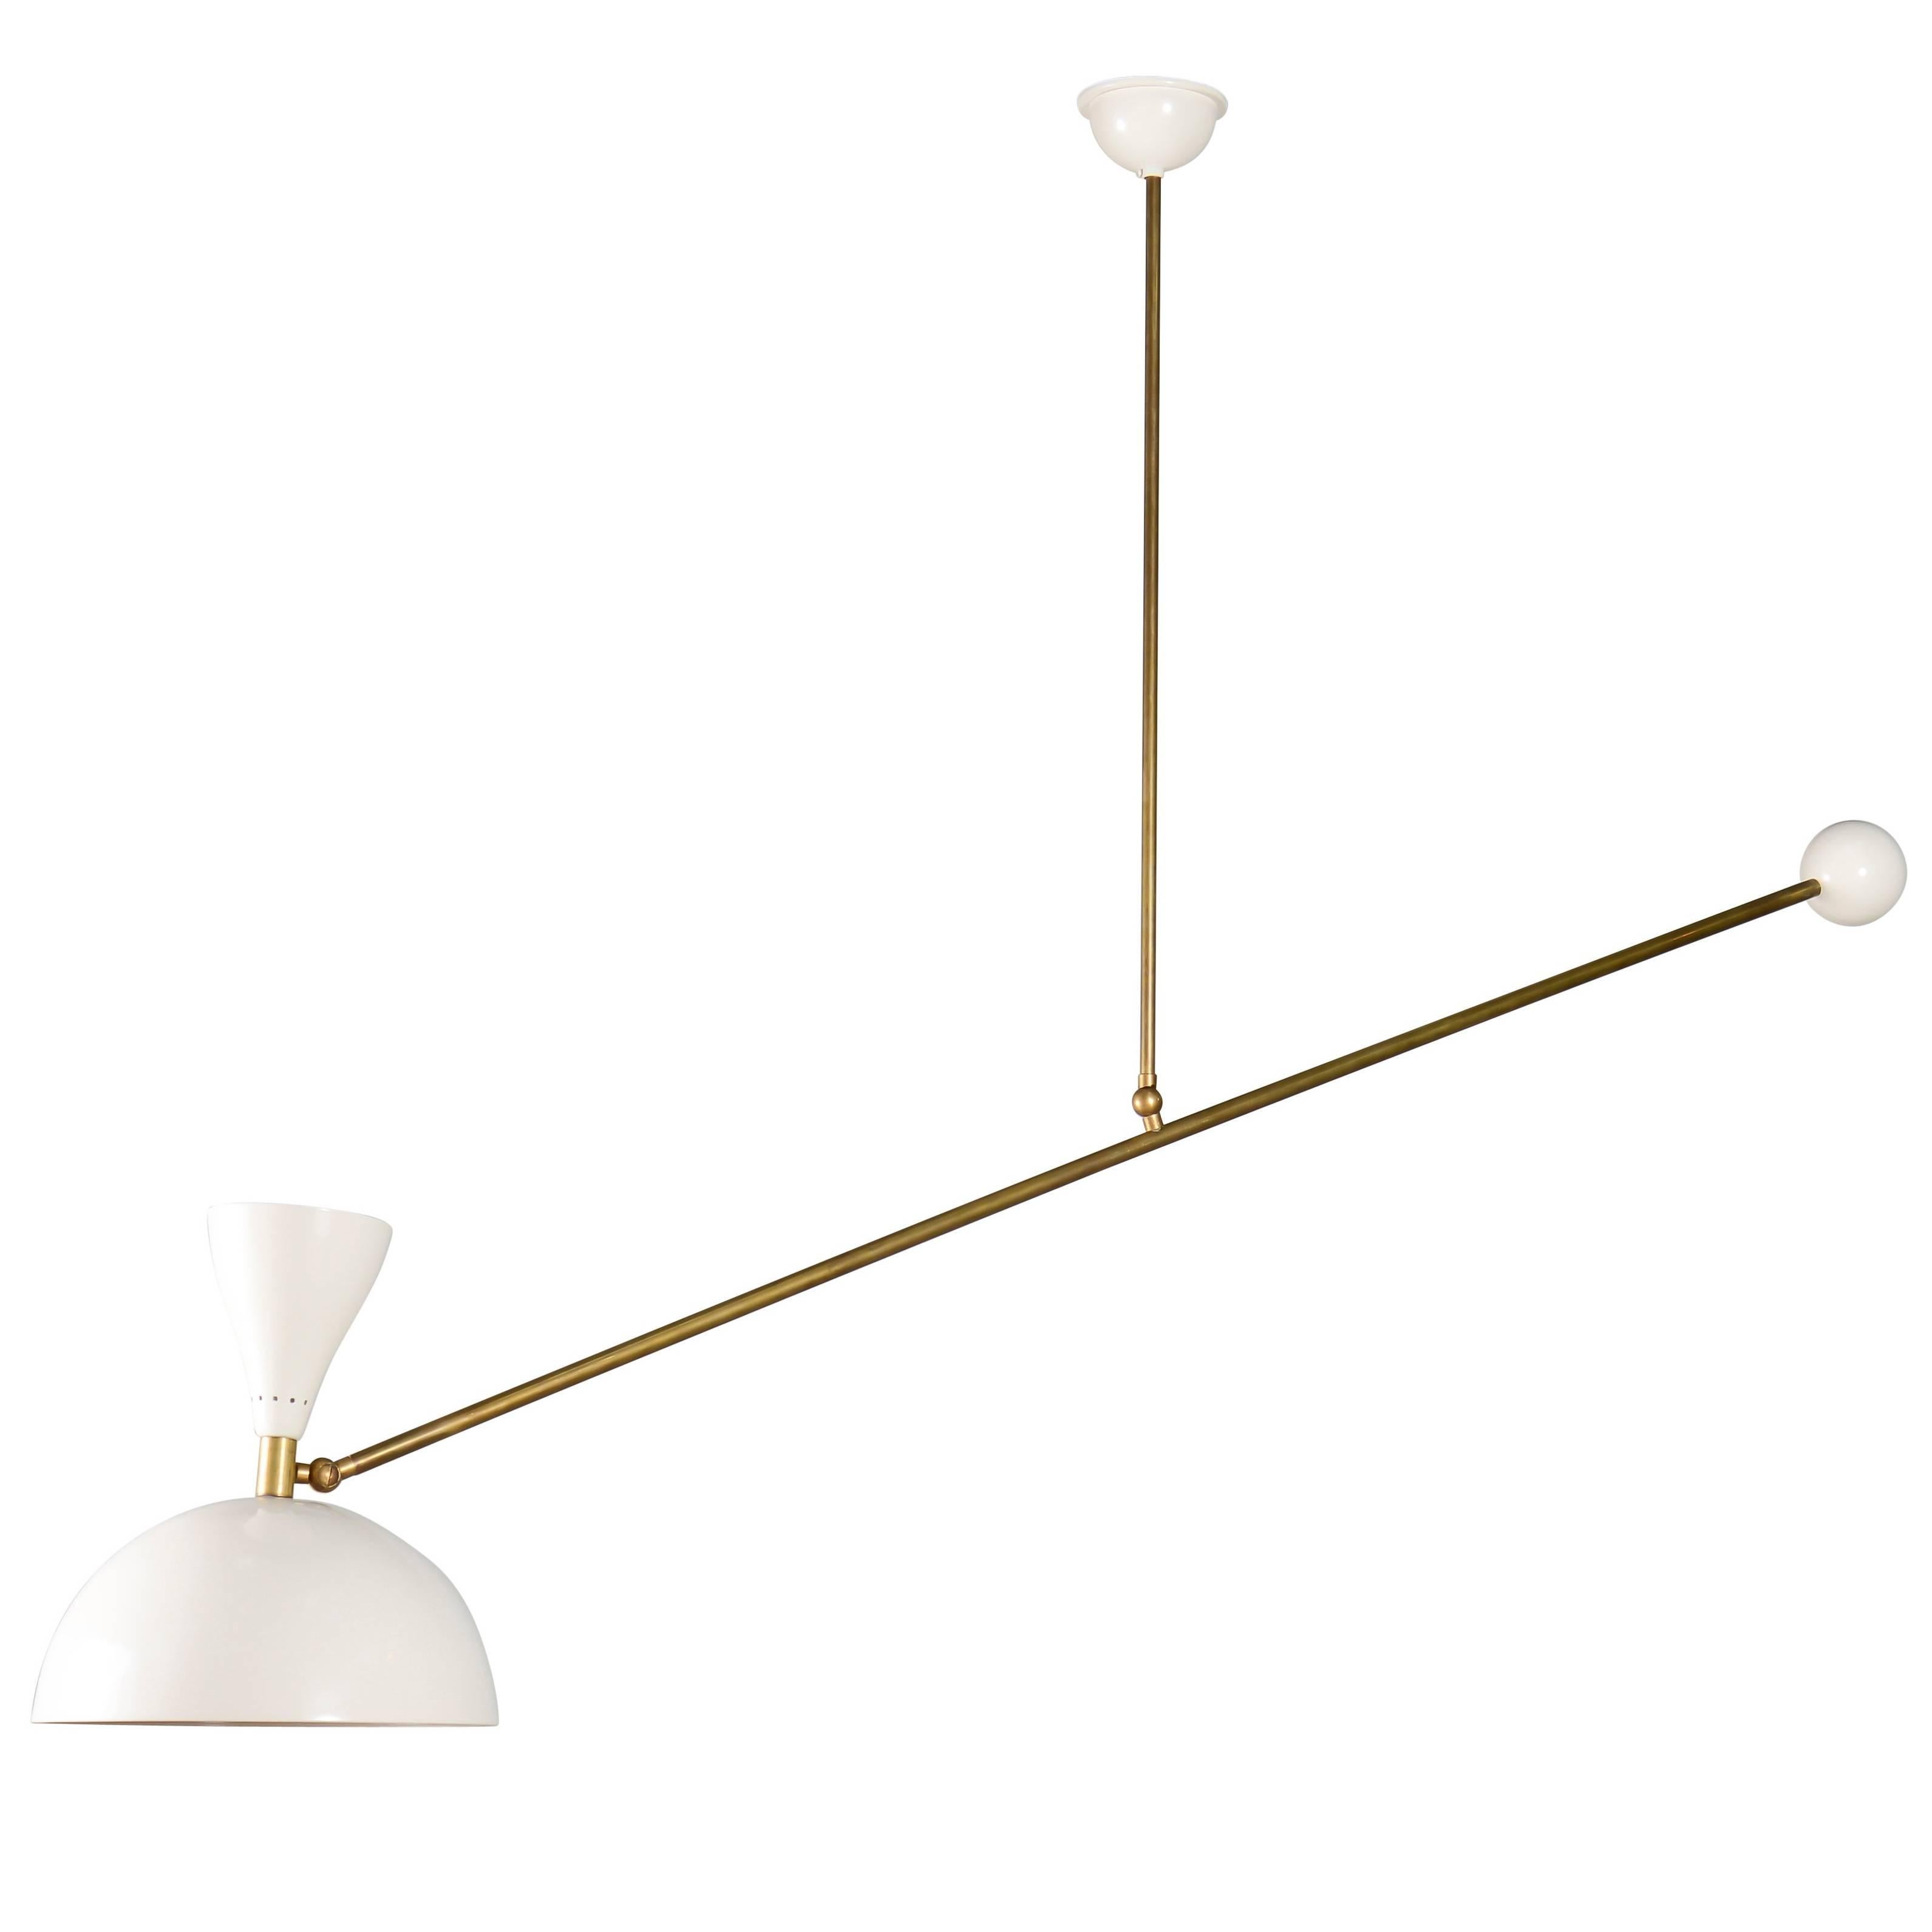 Equilibrio Pendant Lights For Sale